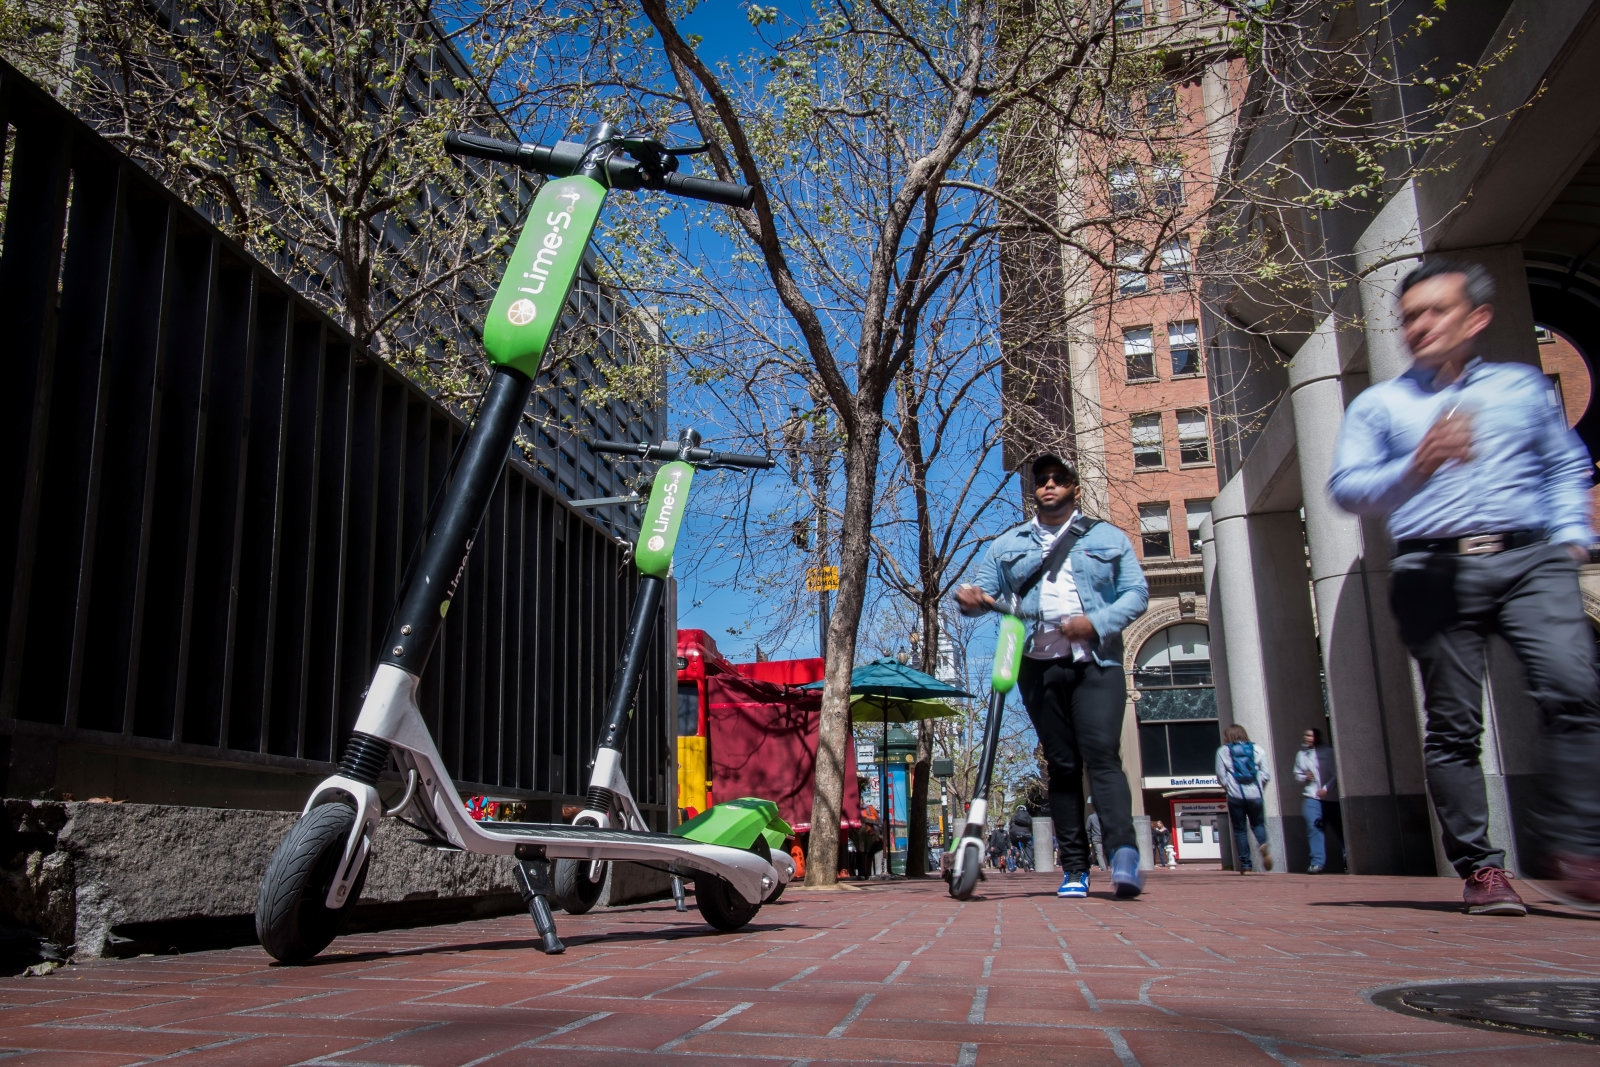 Silicon Valley’s scooter scourge is coming to an end | DeviceDaily.com